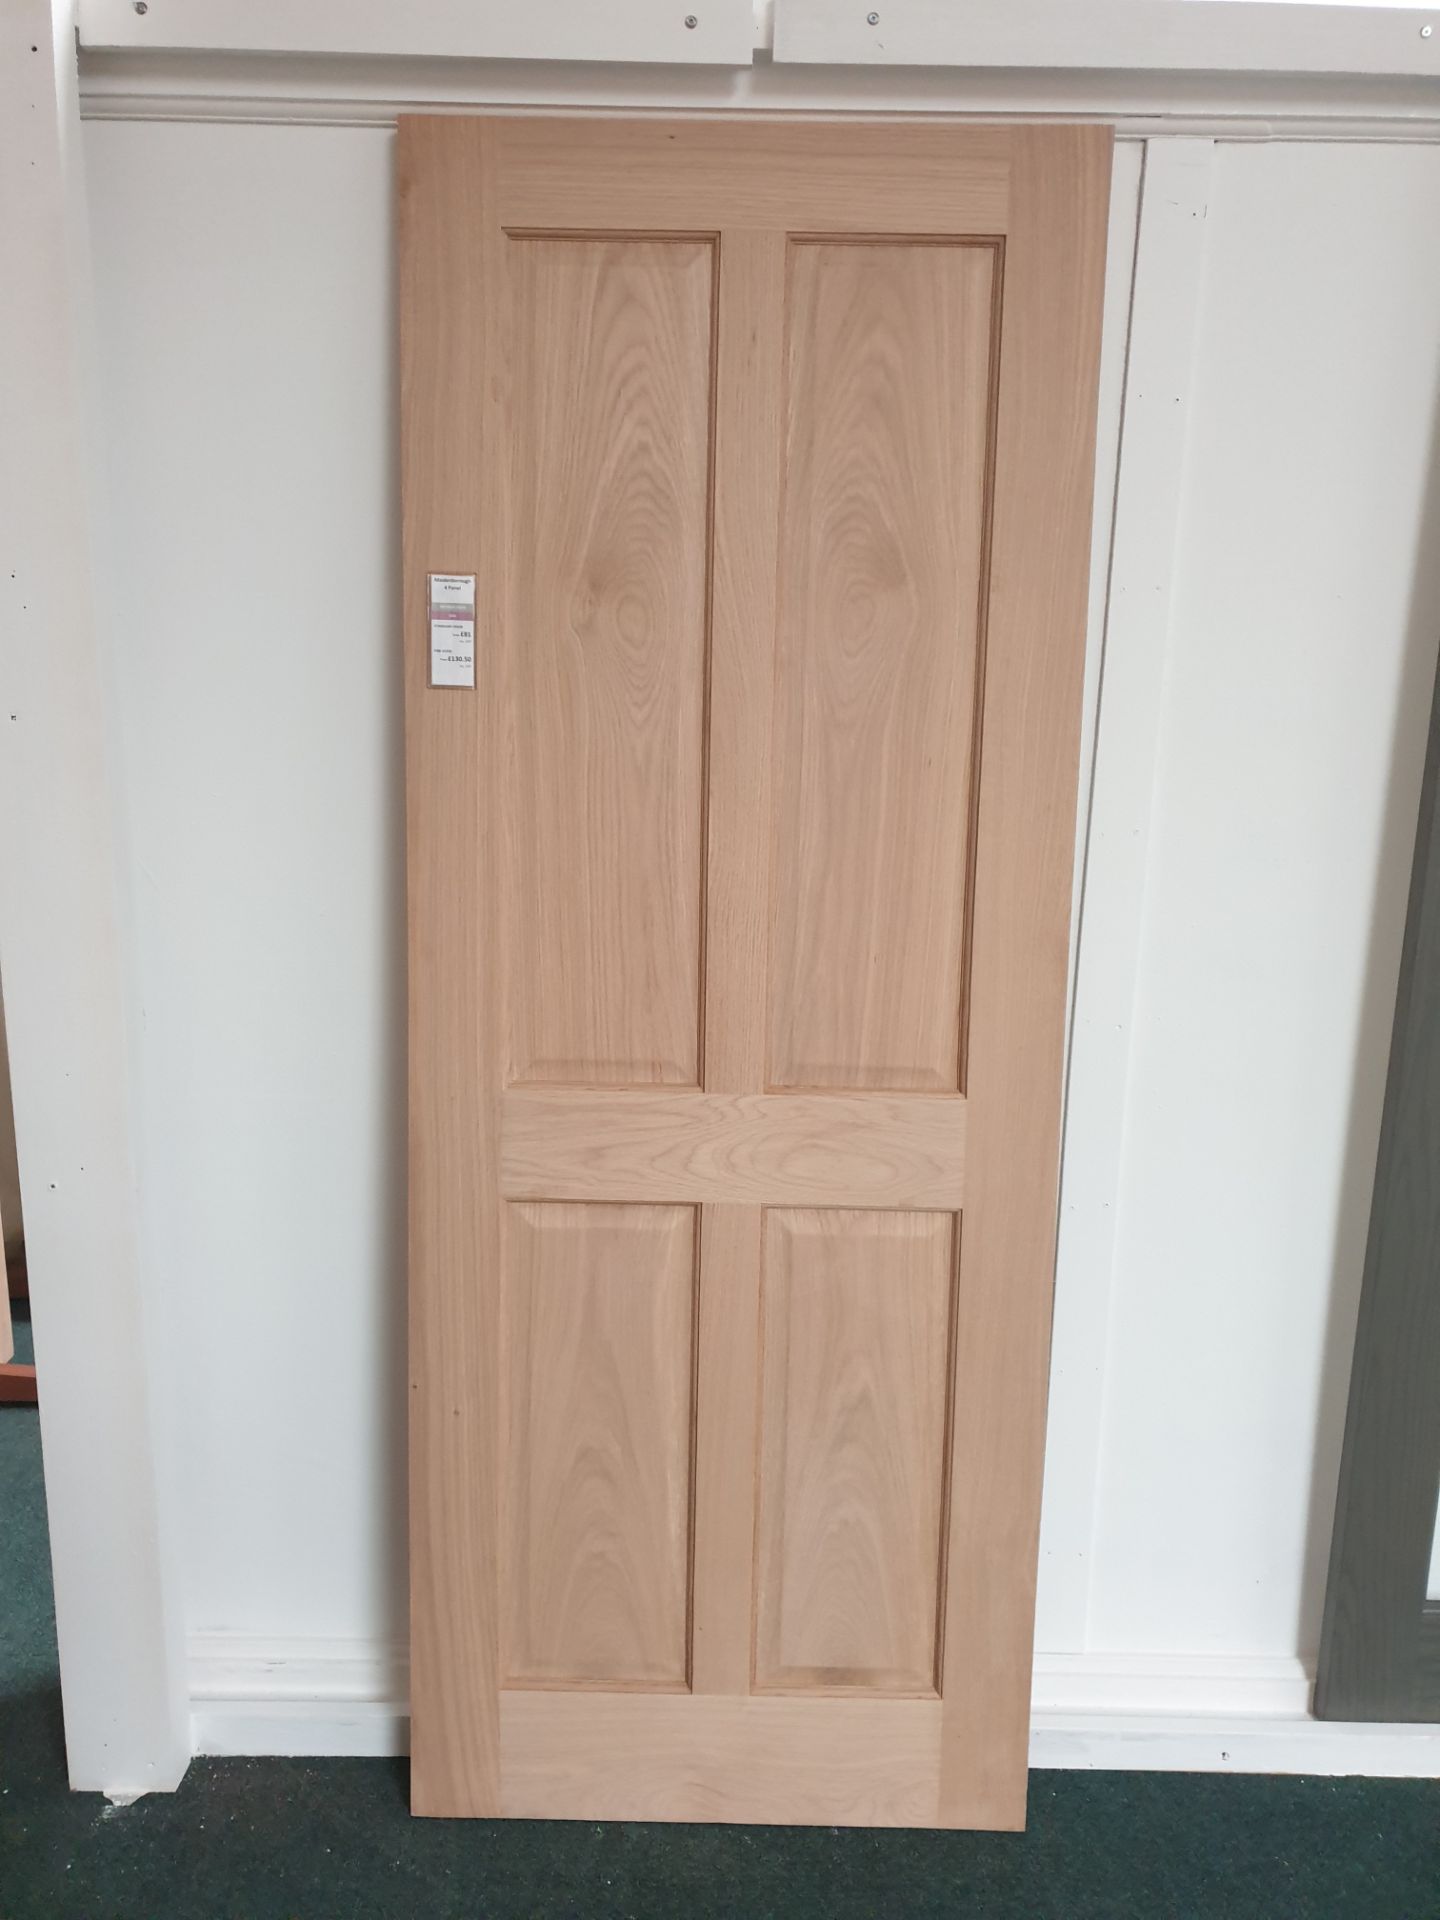 2 x WHITE OAK Maidenborough 4PFD30 AWOMA14P32FD Fire Door 80”x32”x44mm - Lots to be handed out in